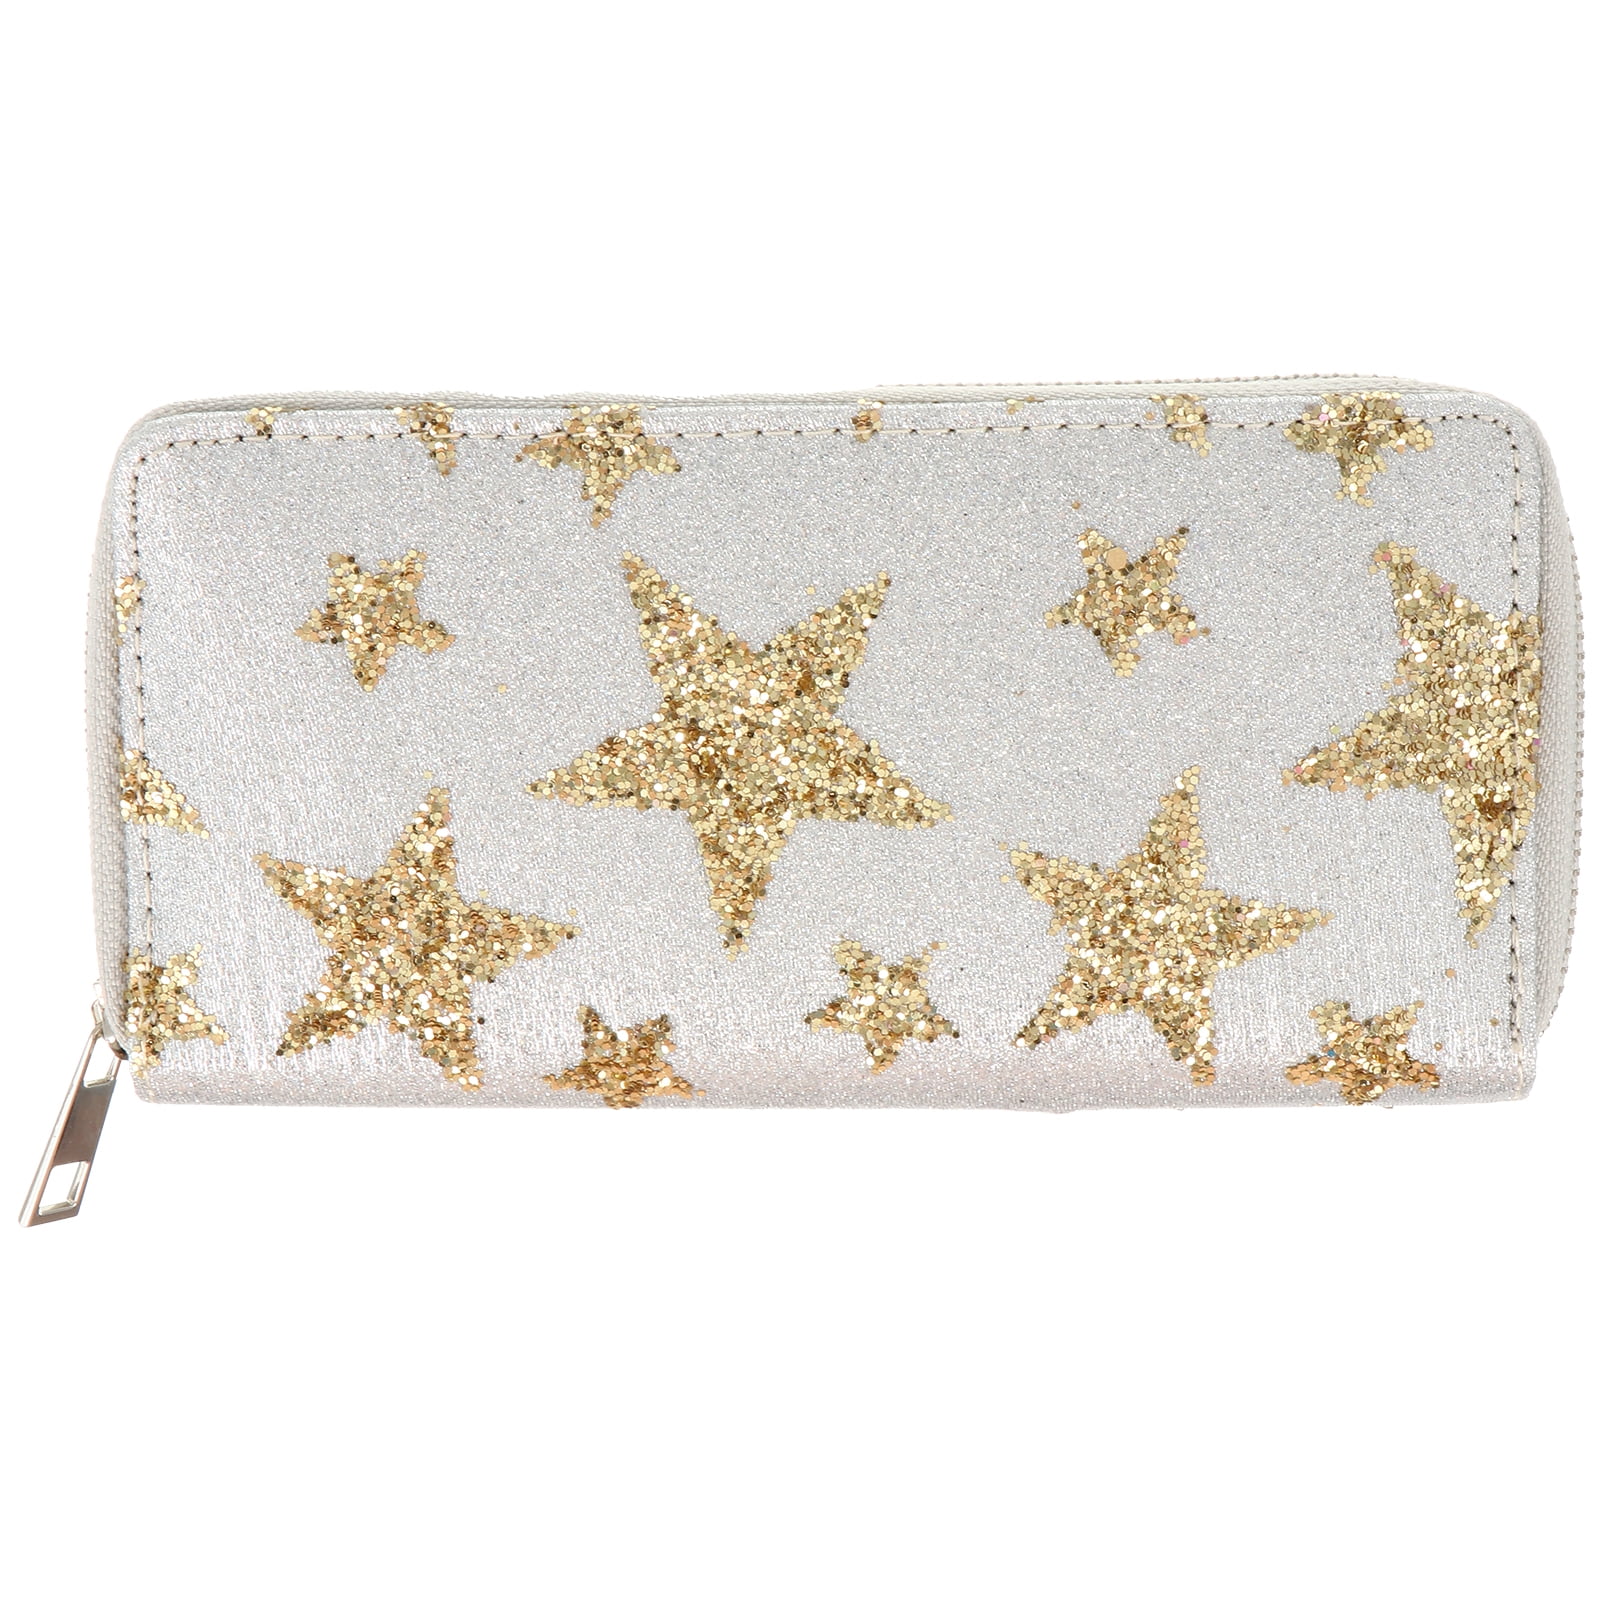 Star Printed PU Leather Long Wallet Clutch Bag Purse with Zipper